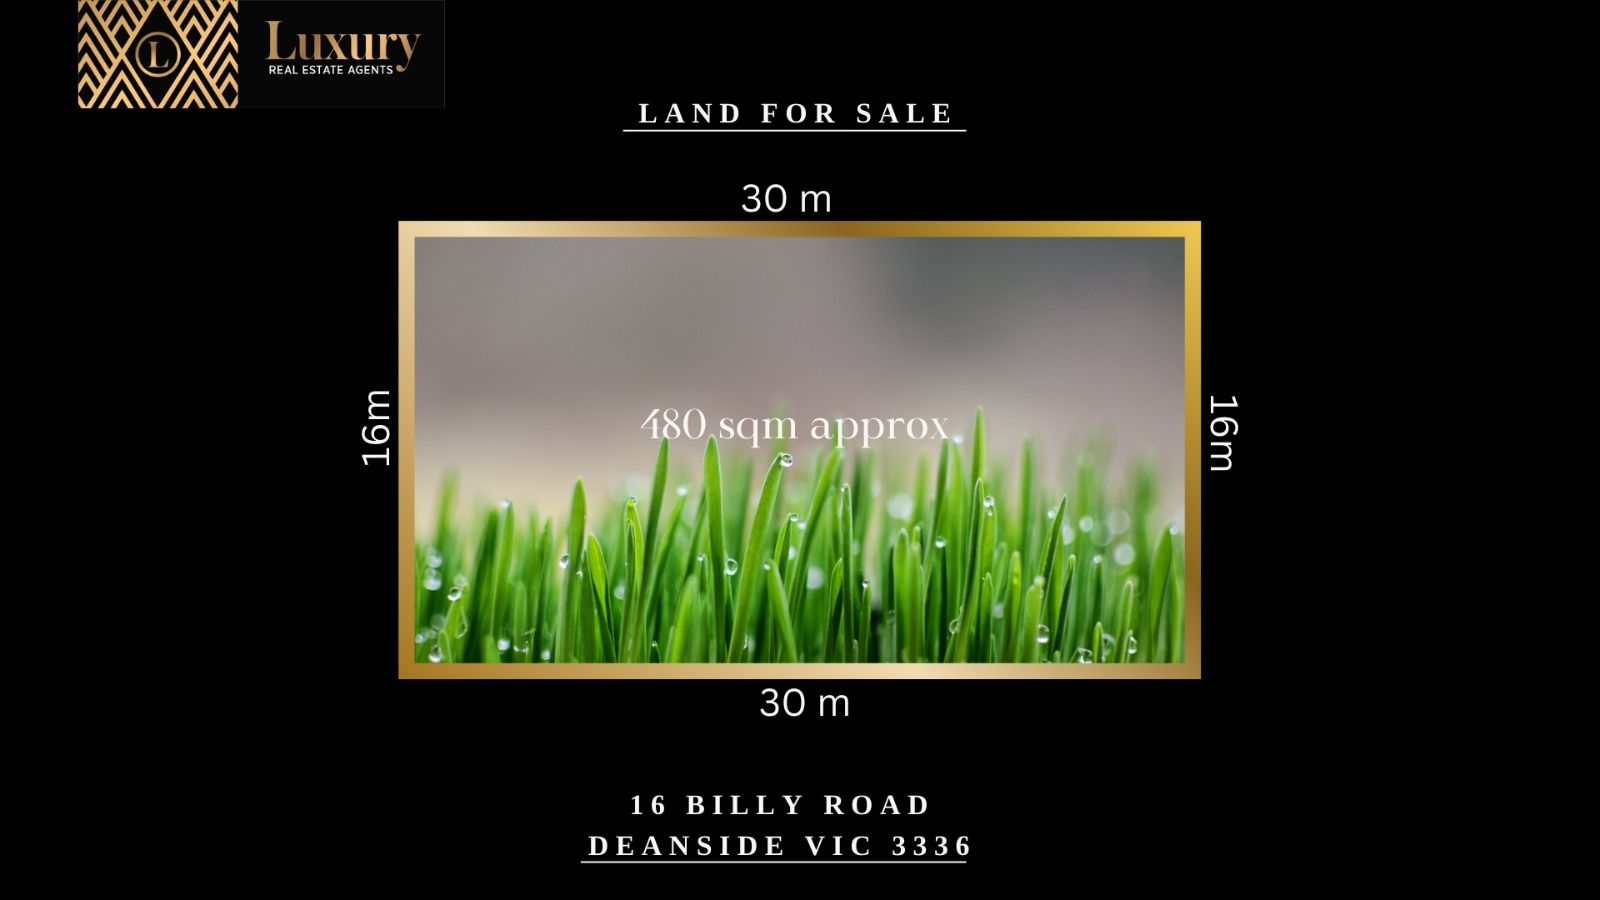 Vacant land in 16 billy road, DEANSIDE VIC, 3336